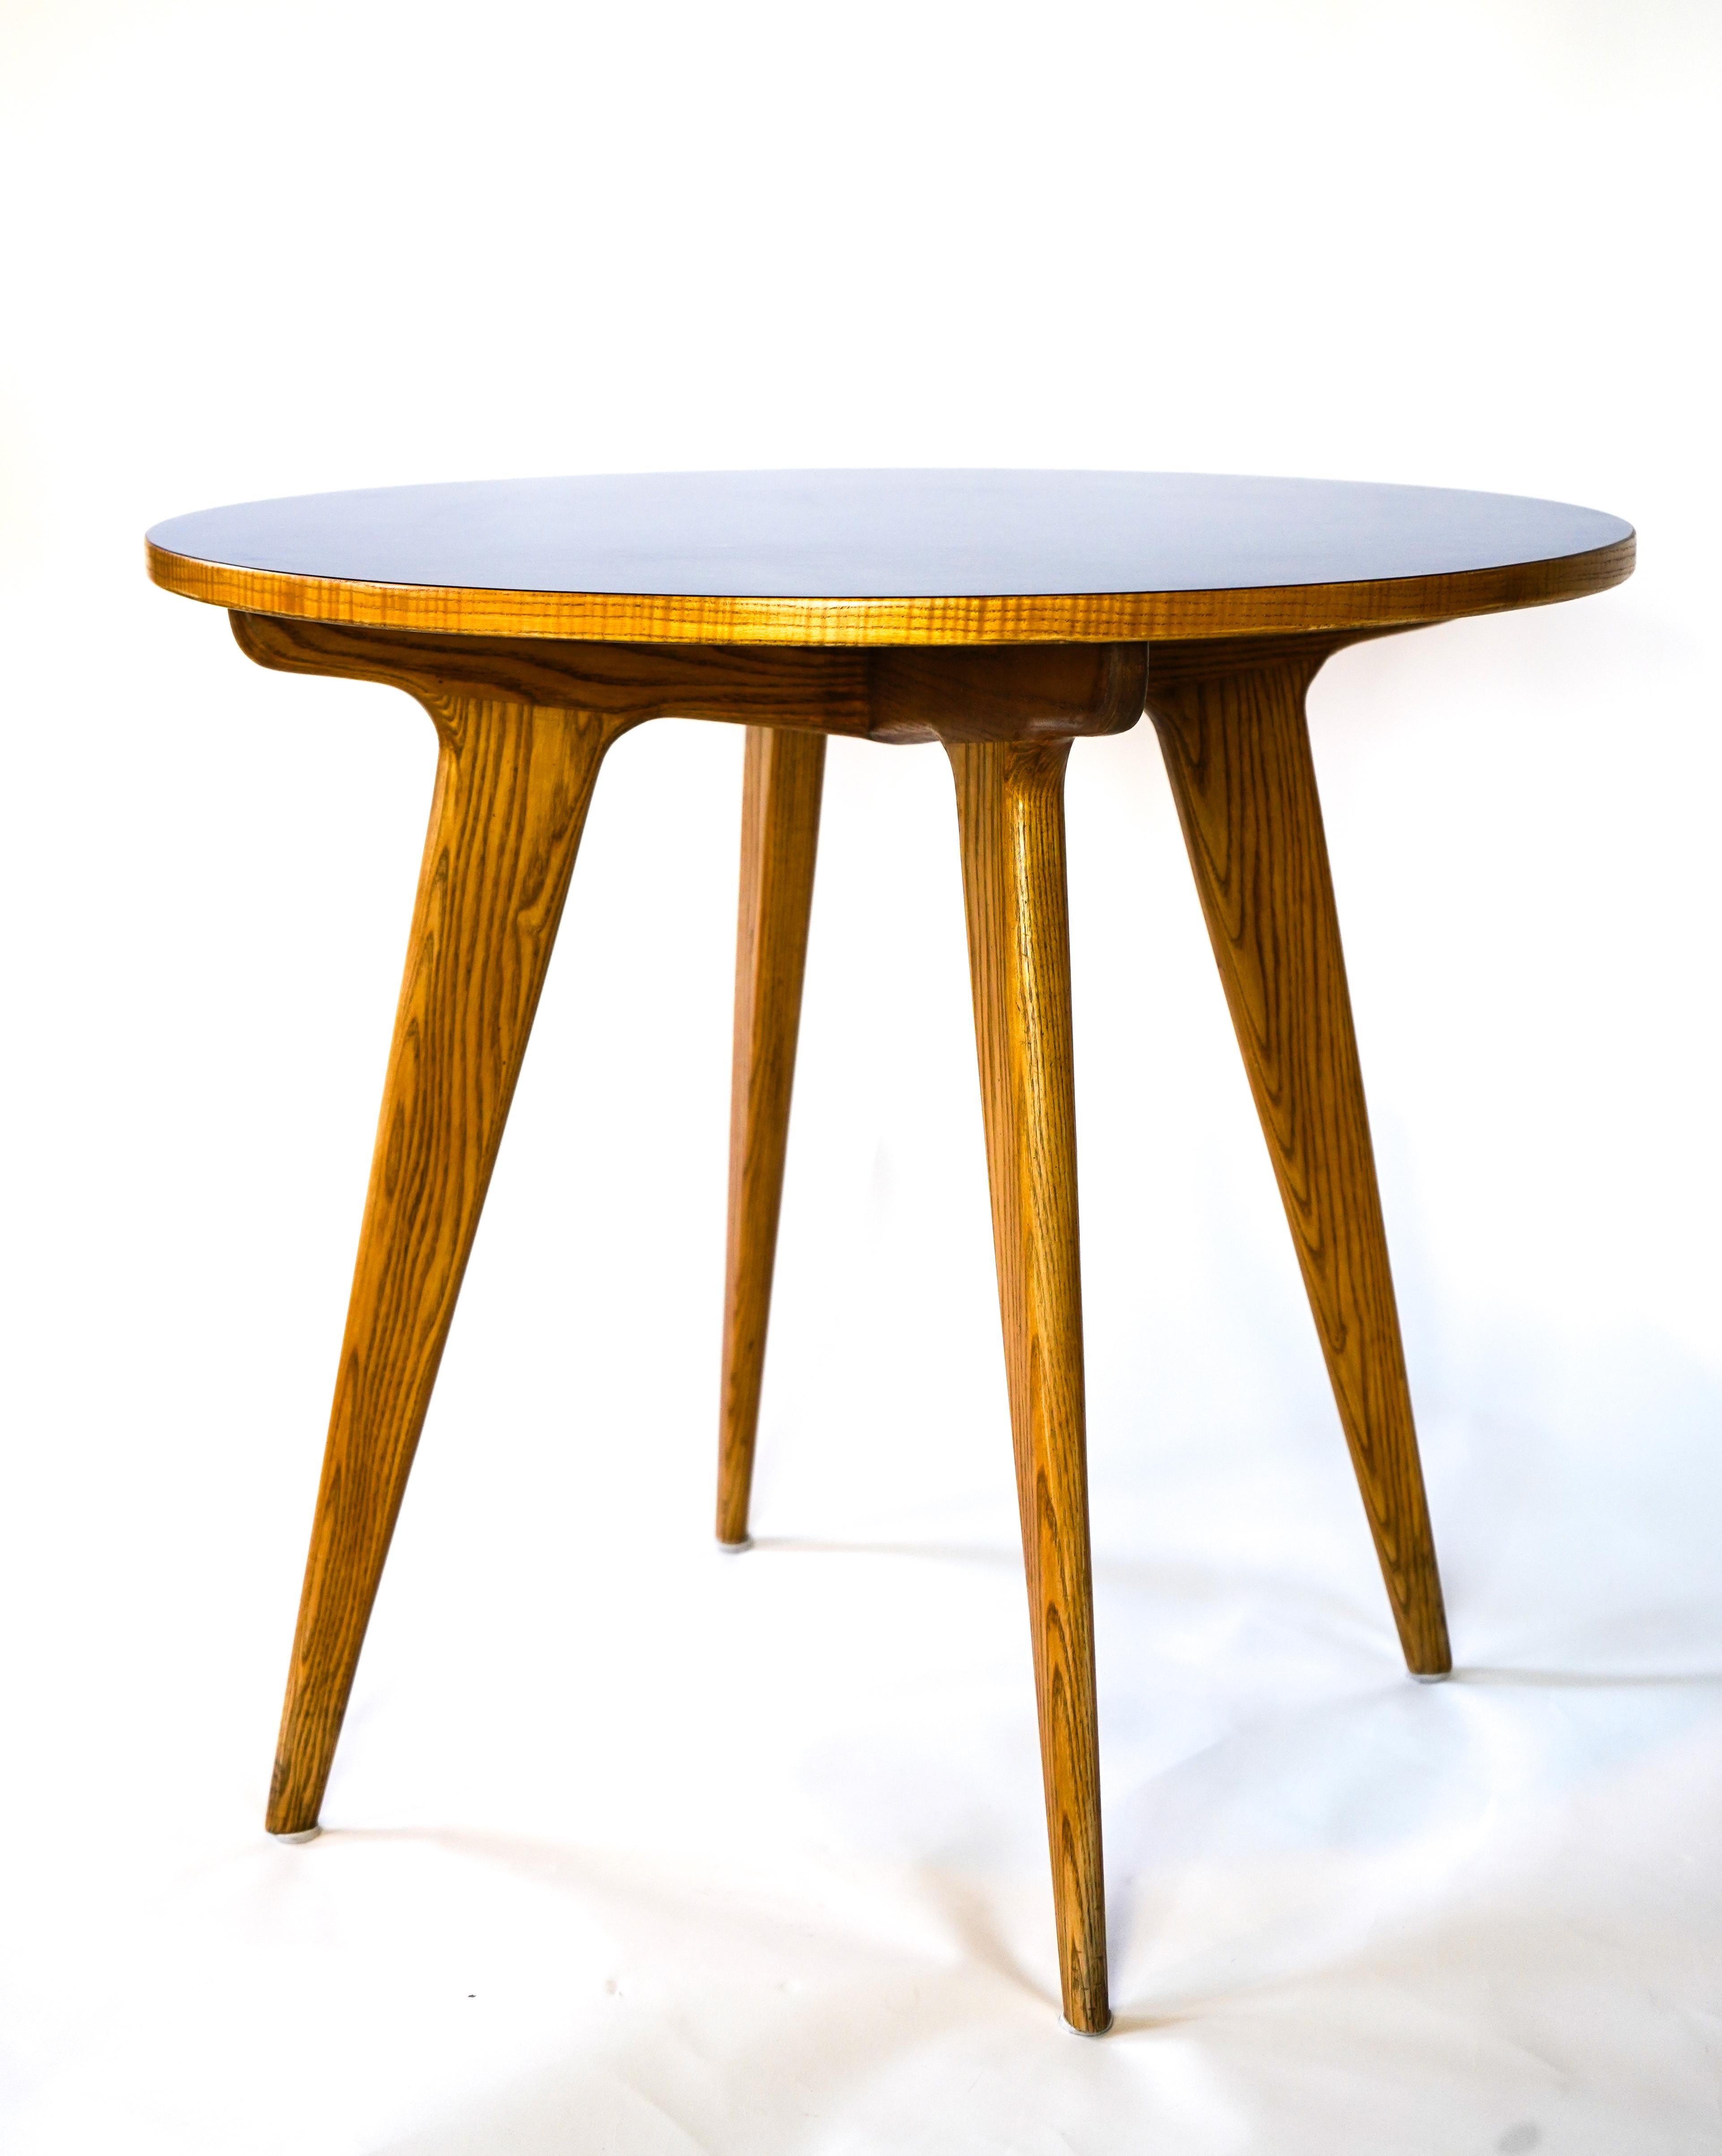 Mid-20th Century Gio Ponti Table Designed for Parco Die Principi Hotel Sorrento Italy